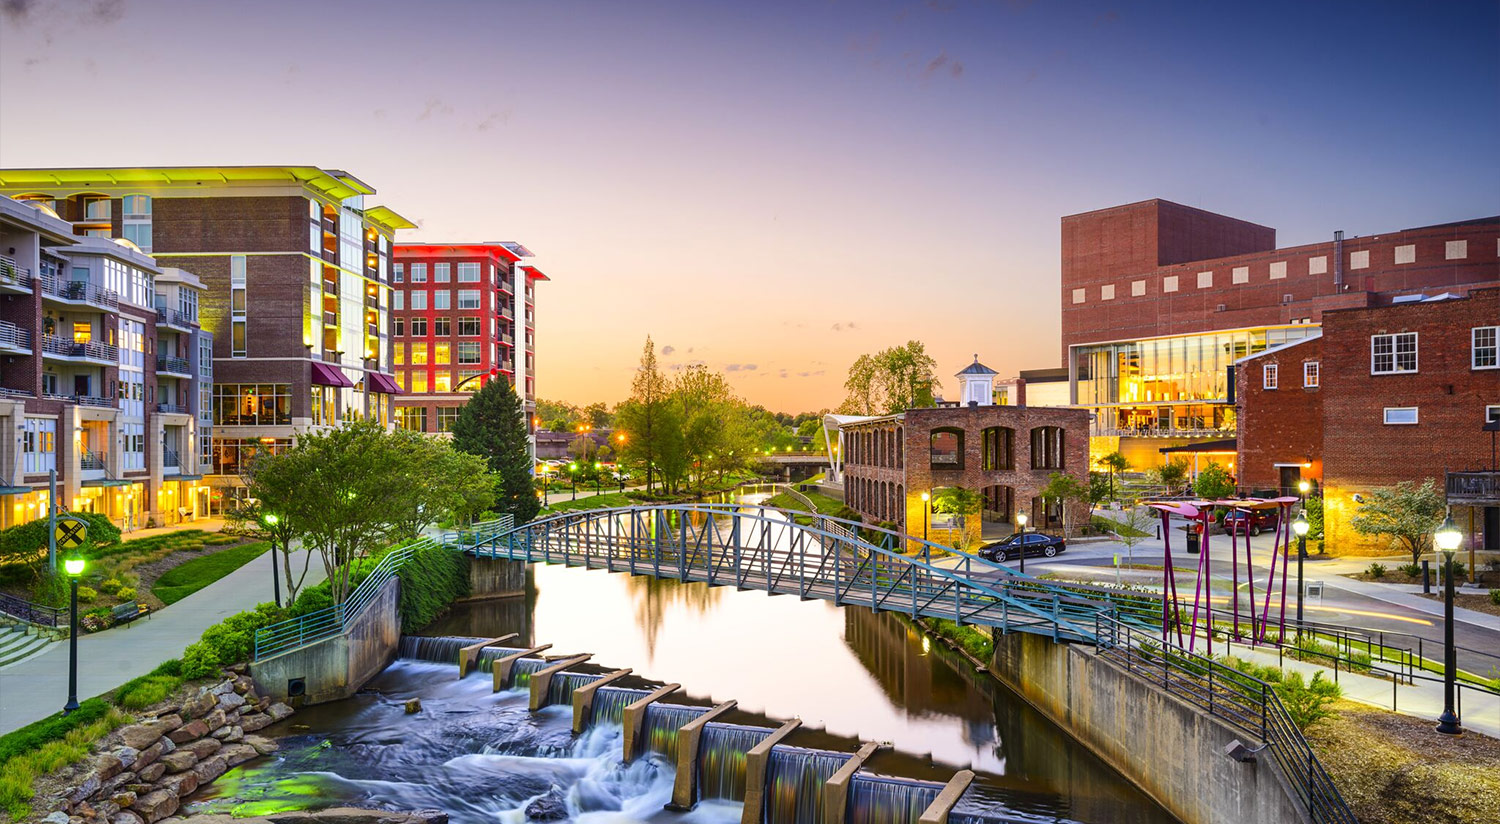 THE STUDIO 6 GREENVILLE, SC I-85 NEAR DOWNTOWN IS IDEALLY LOCATED NEAR POPULAR GREENVILLE ATTRACTIONS